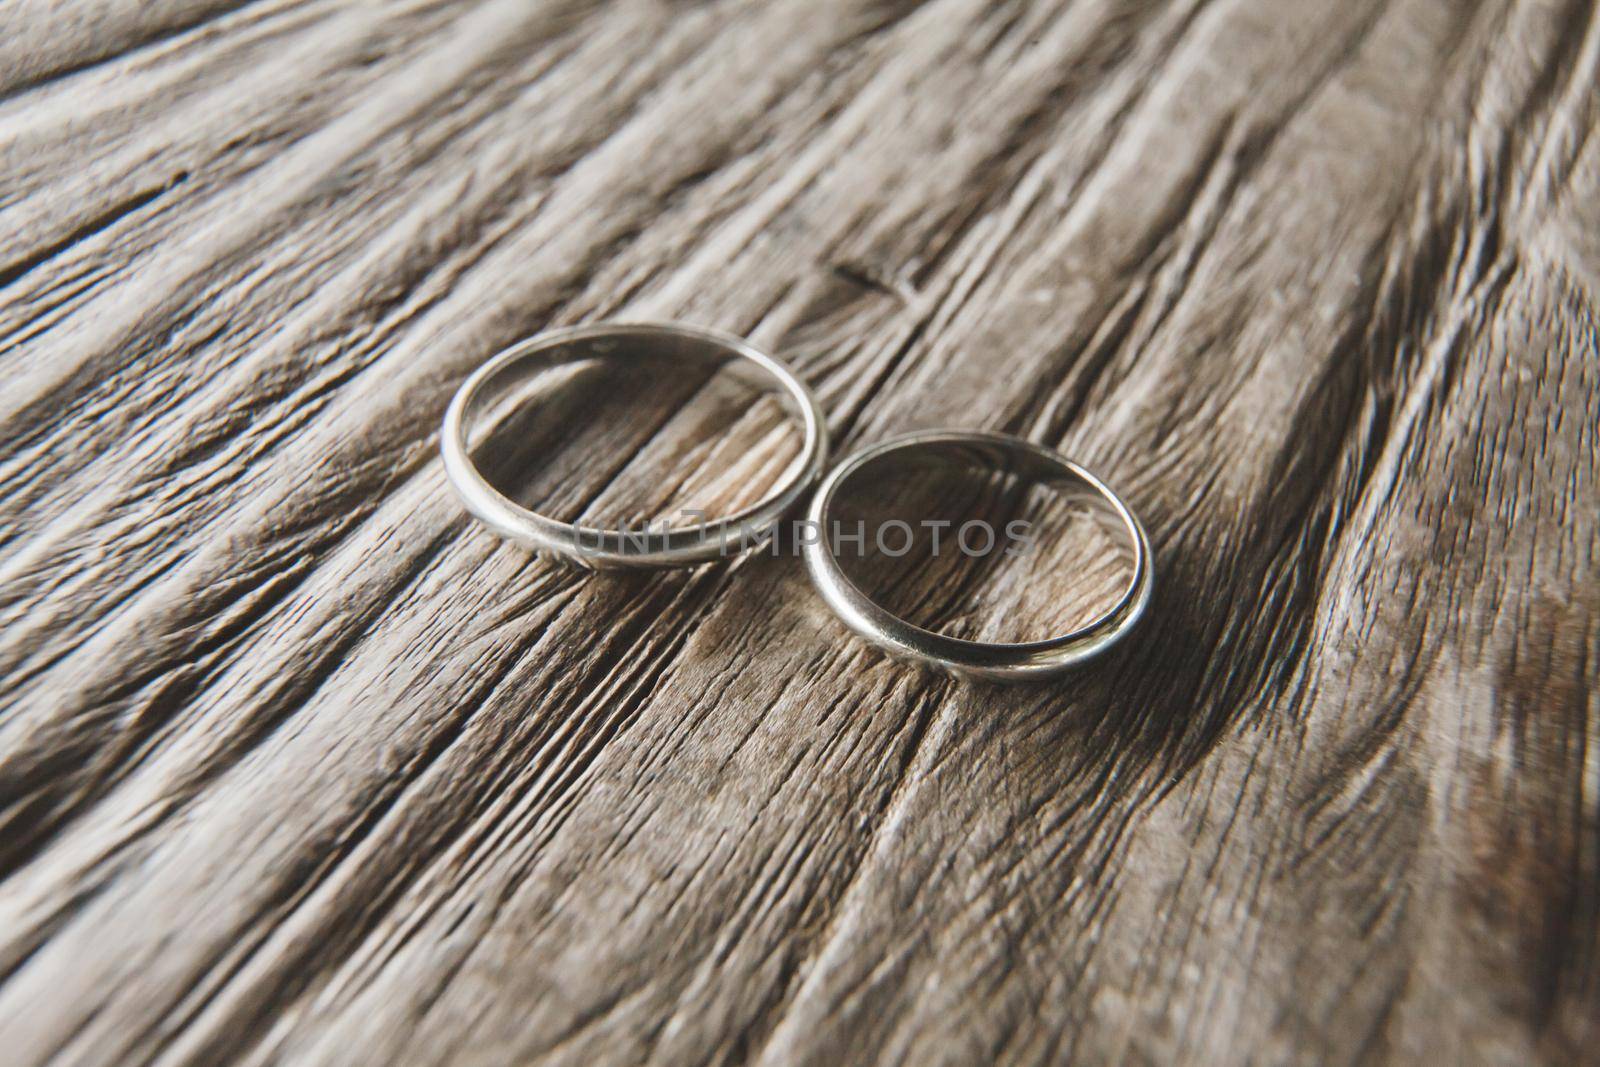 Macro shooting of gold wedding rings on the texture of wood.